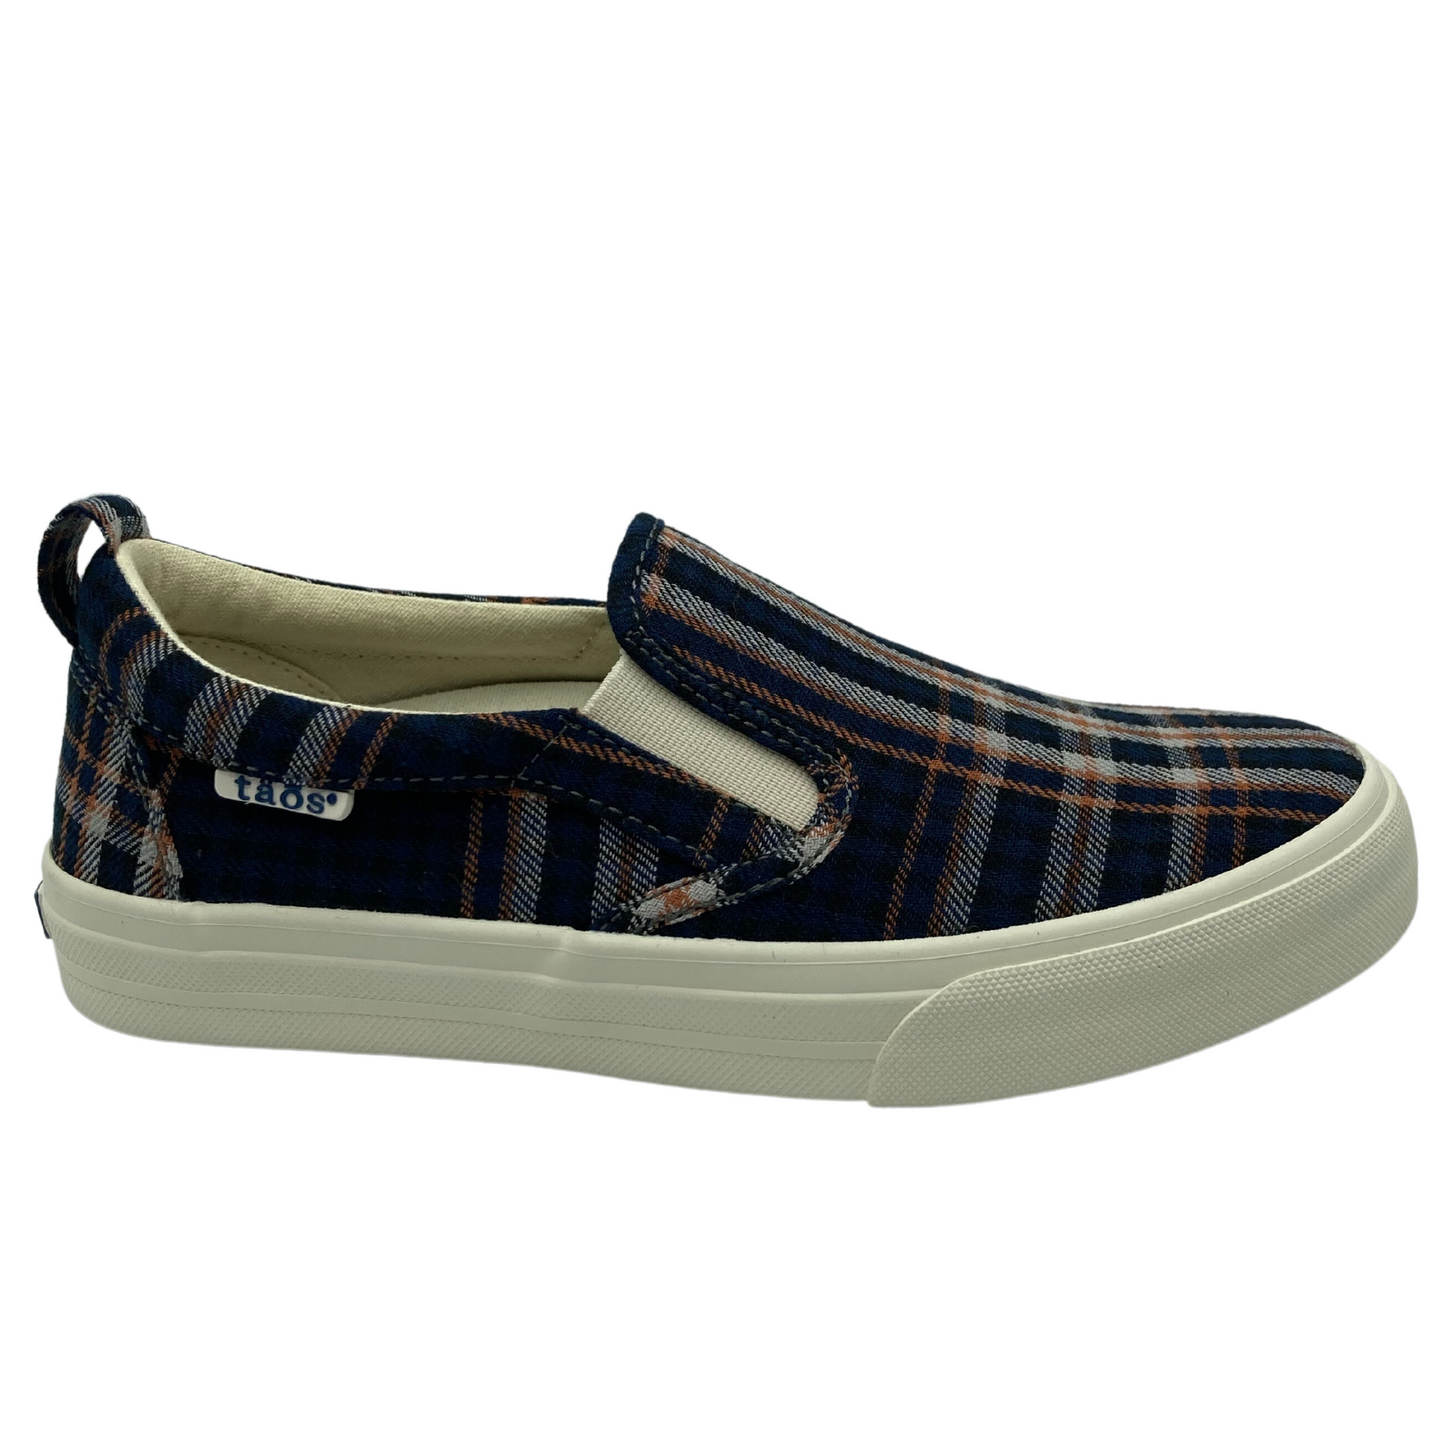 Right facing view of plaid canvas slip on shoe with white elastic double gore and white rubber sole